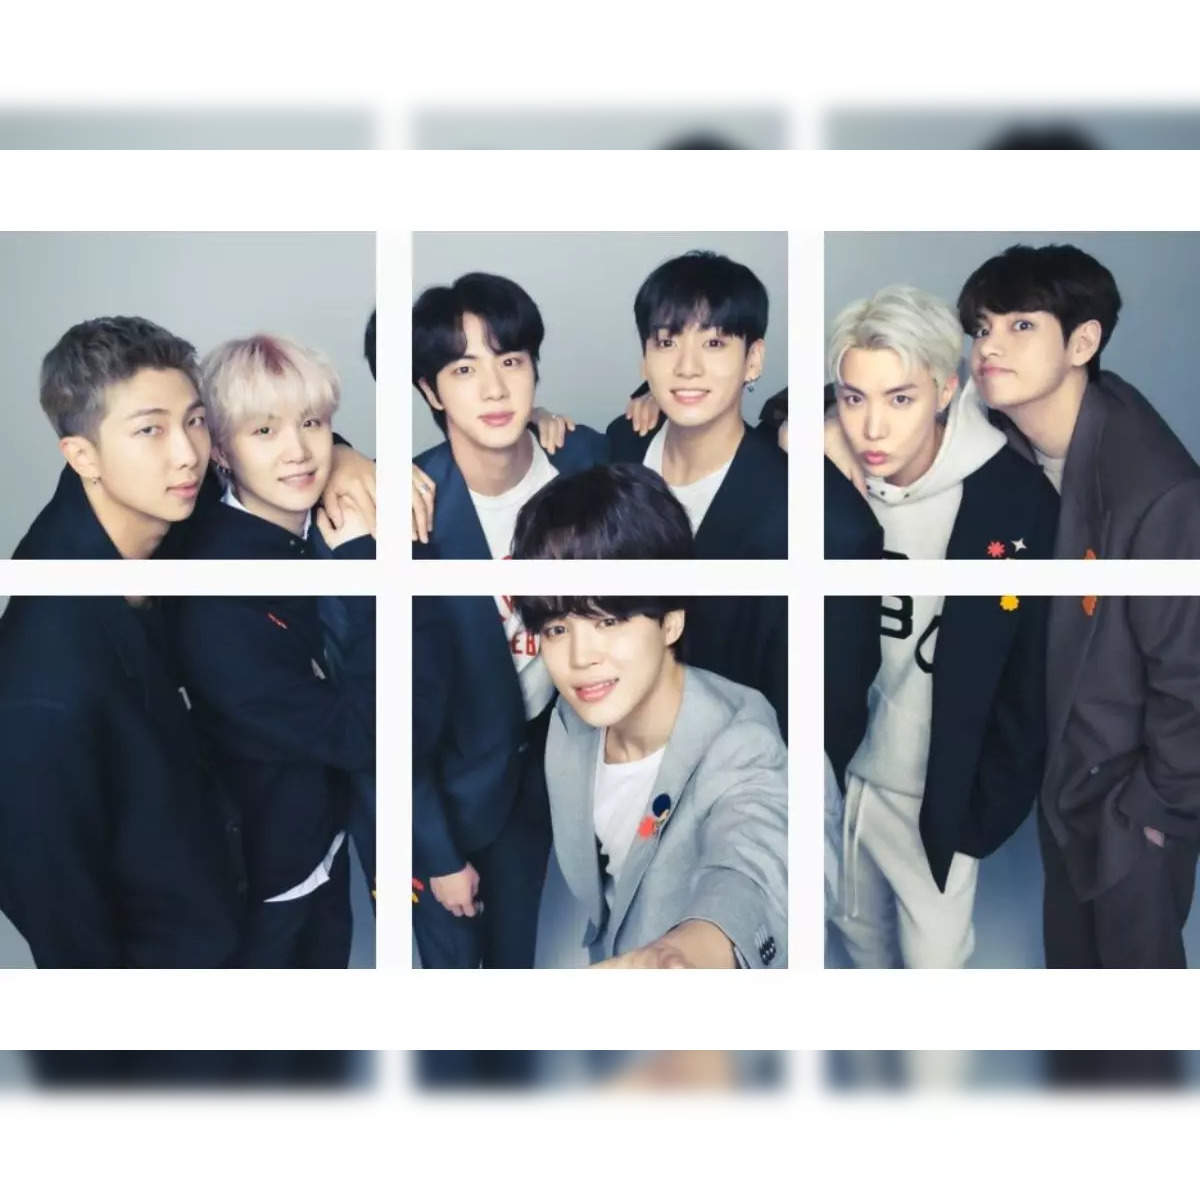 Meet Quick Style, the group behind some of BTS's hottest